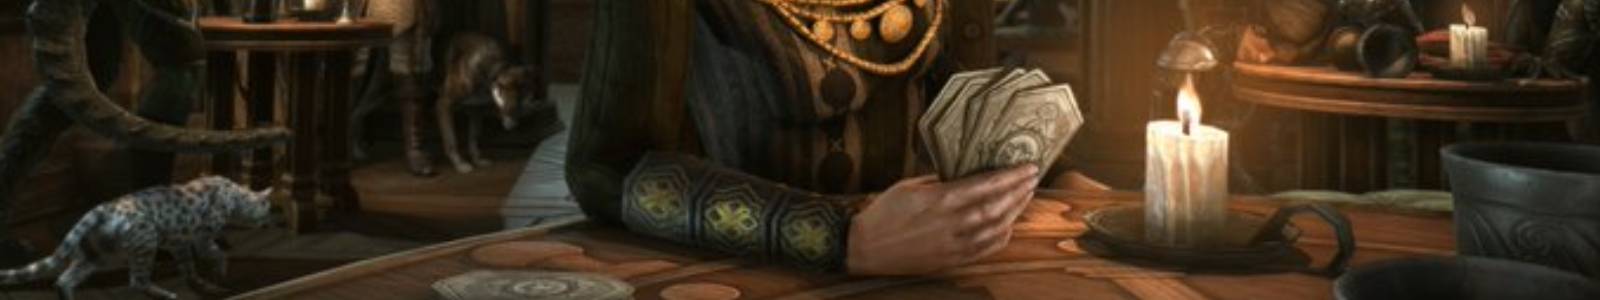 Blackfeather Knave Clue Tales of Tribute Clue - ESO header